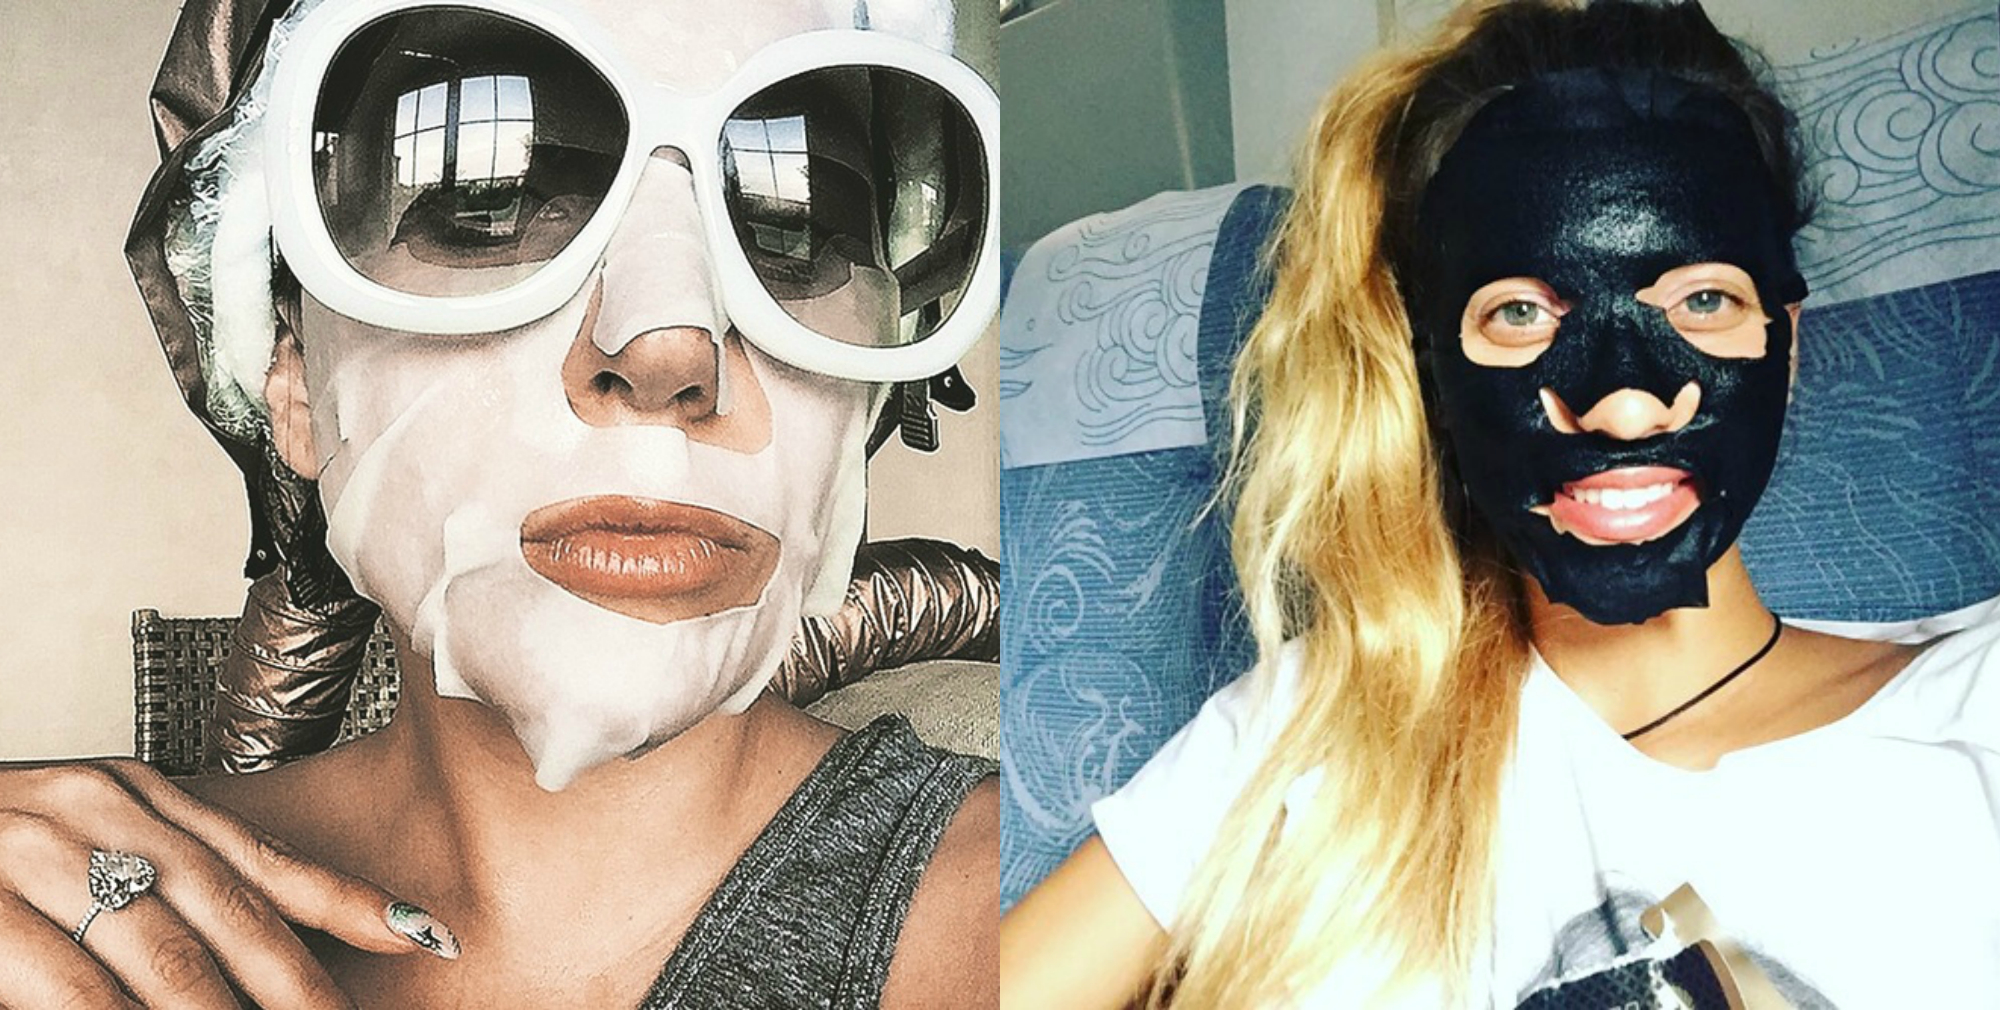 Show of masks: recognize a celebrity during cosmetic procedures!